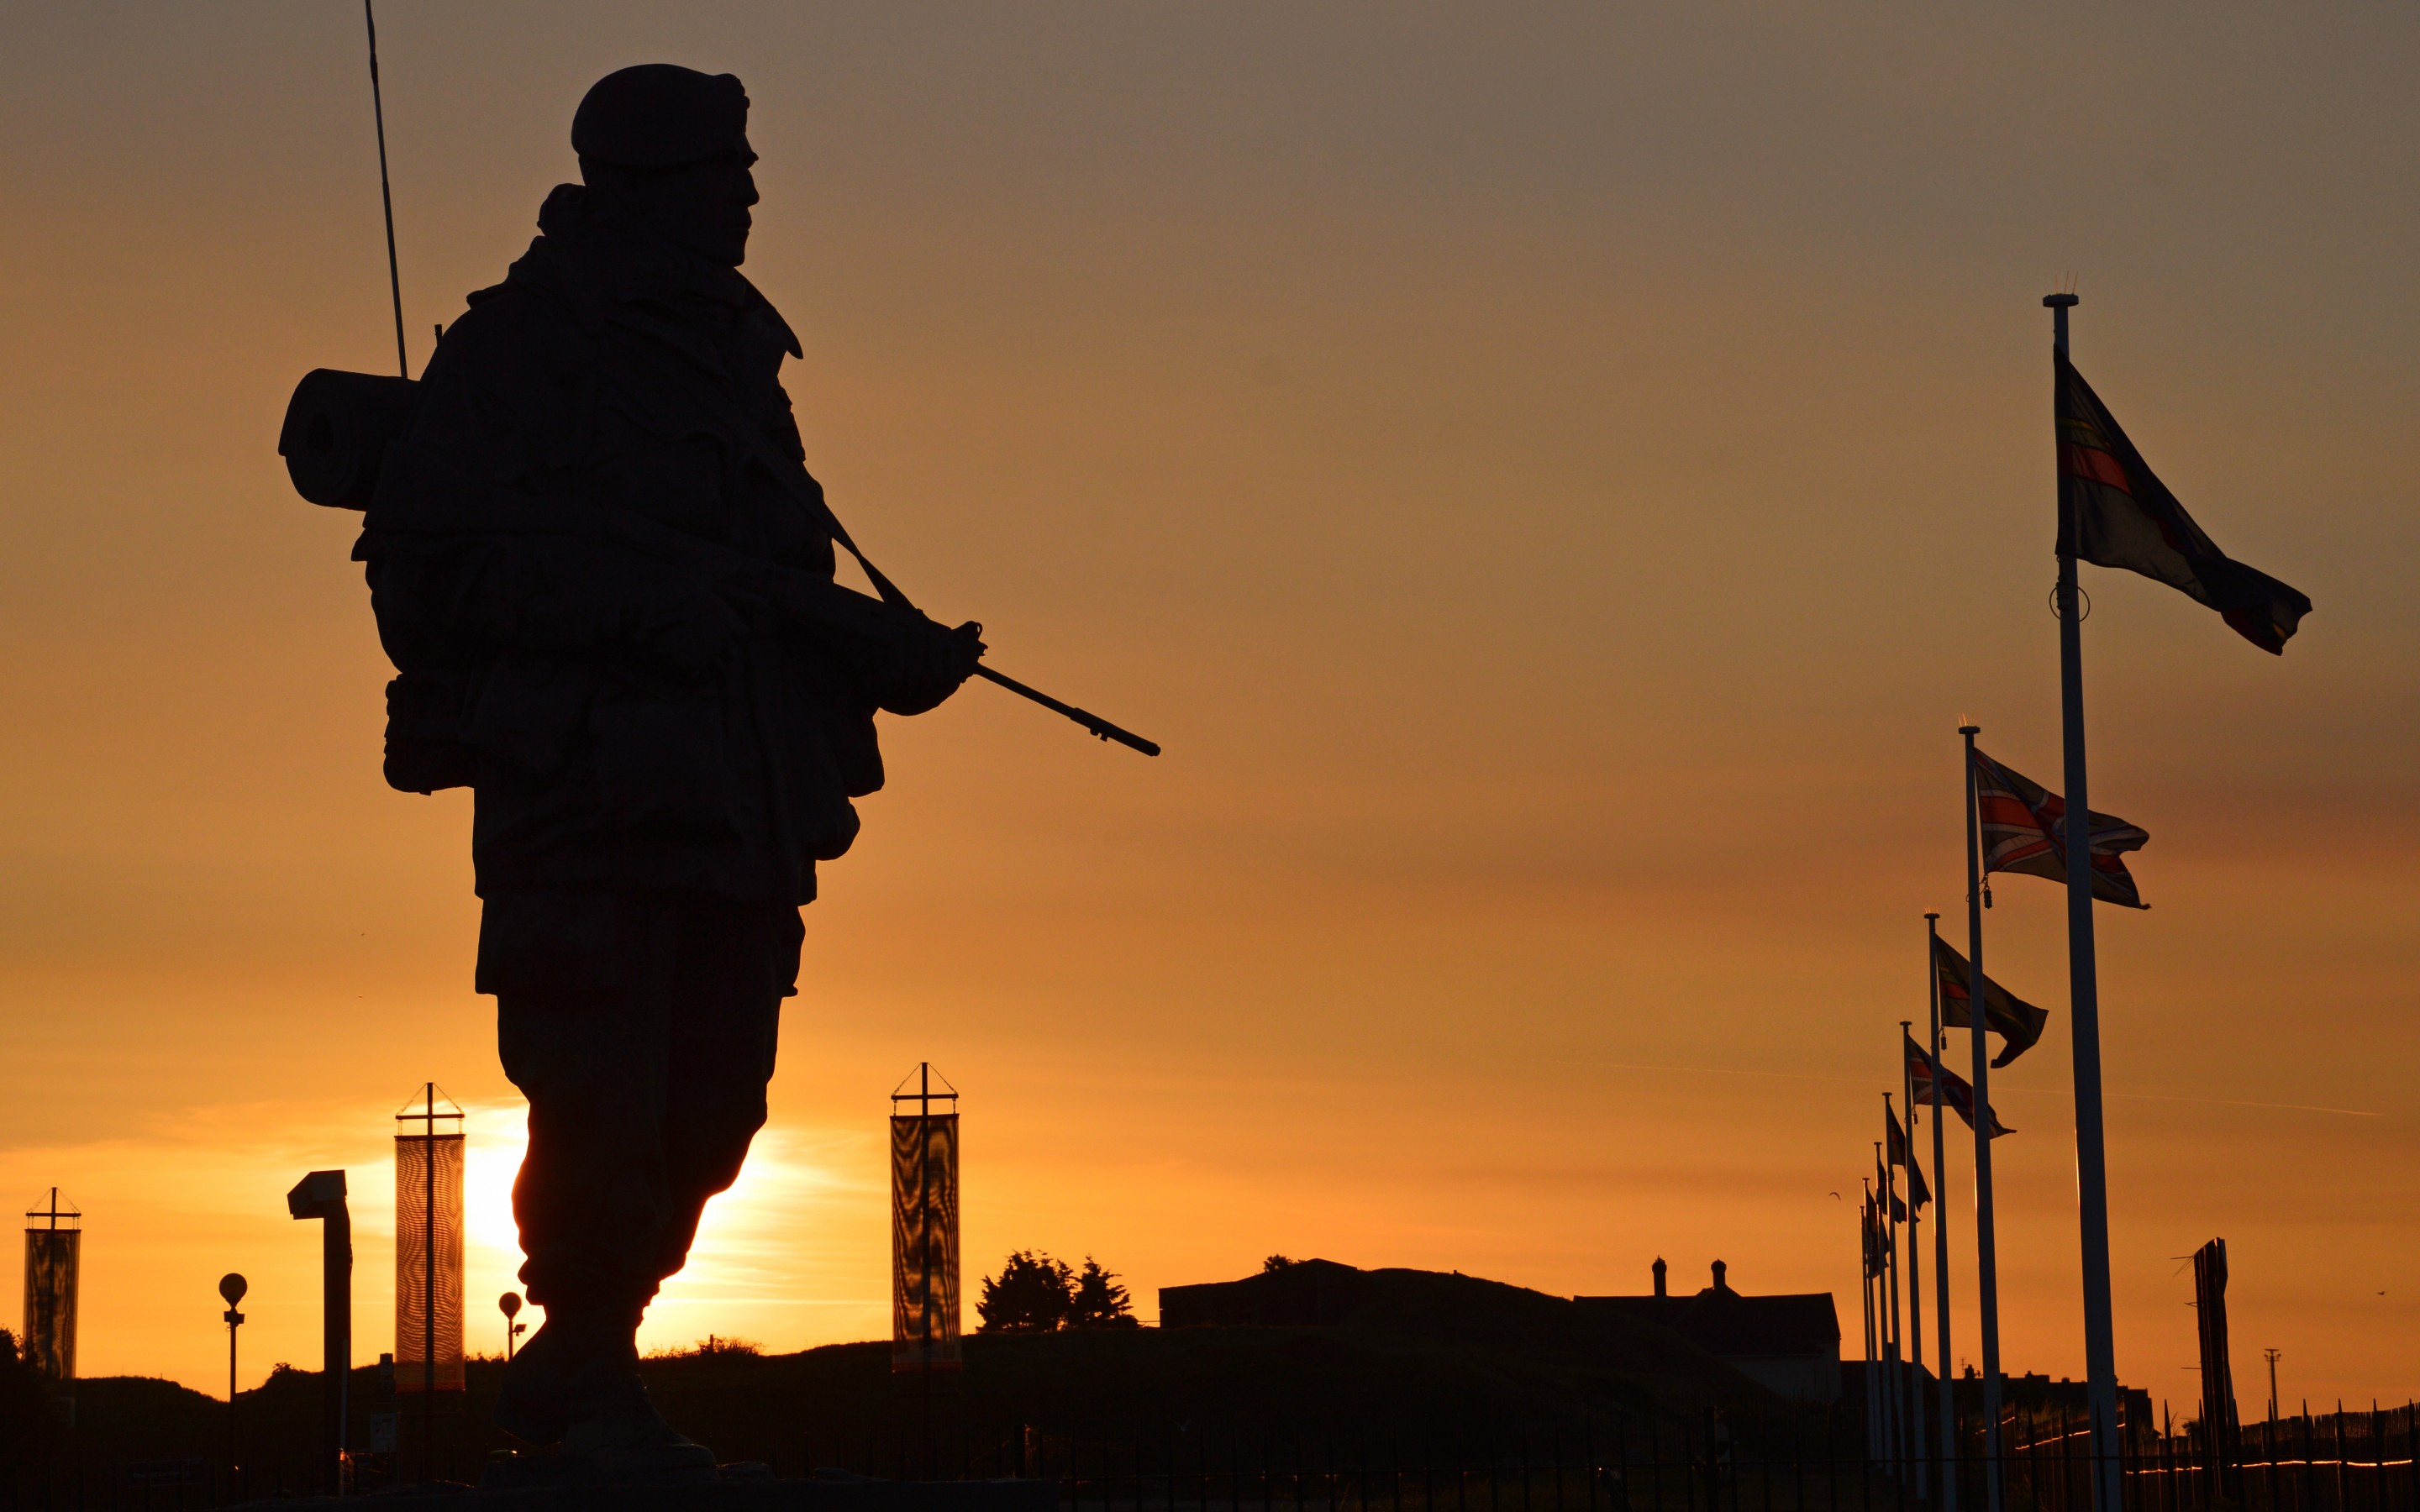 sun, Sunset, Silhouette, Commandos, Soldiers, Weapons, Equipment, Royal, Marines, Uk, Military Wallpaper HD / Desktop and Mobile Background